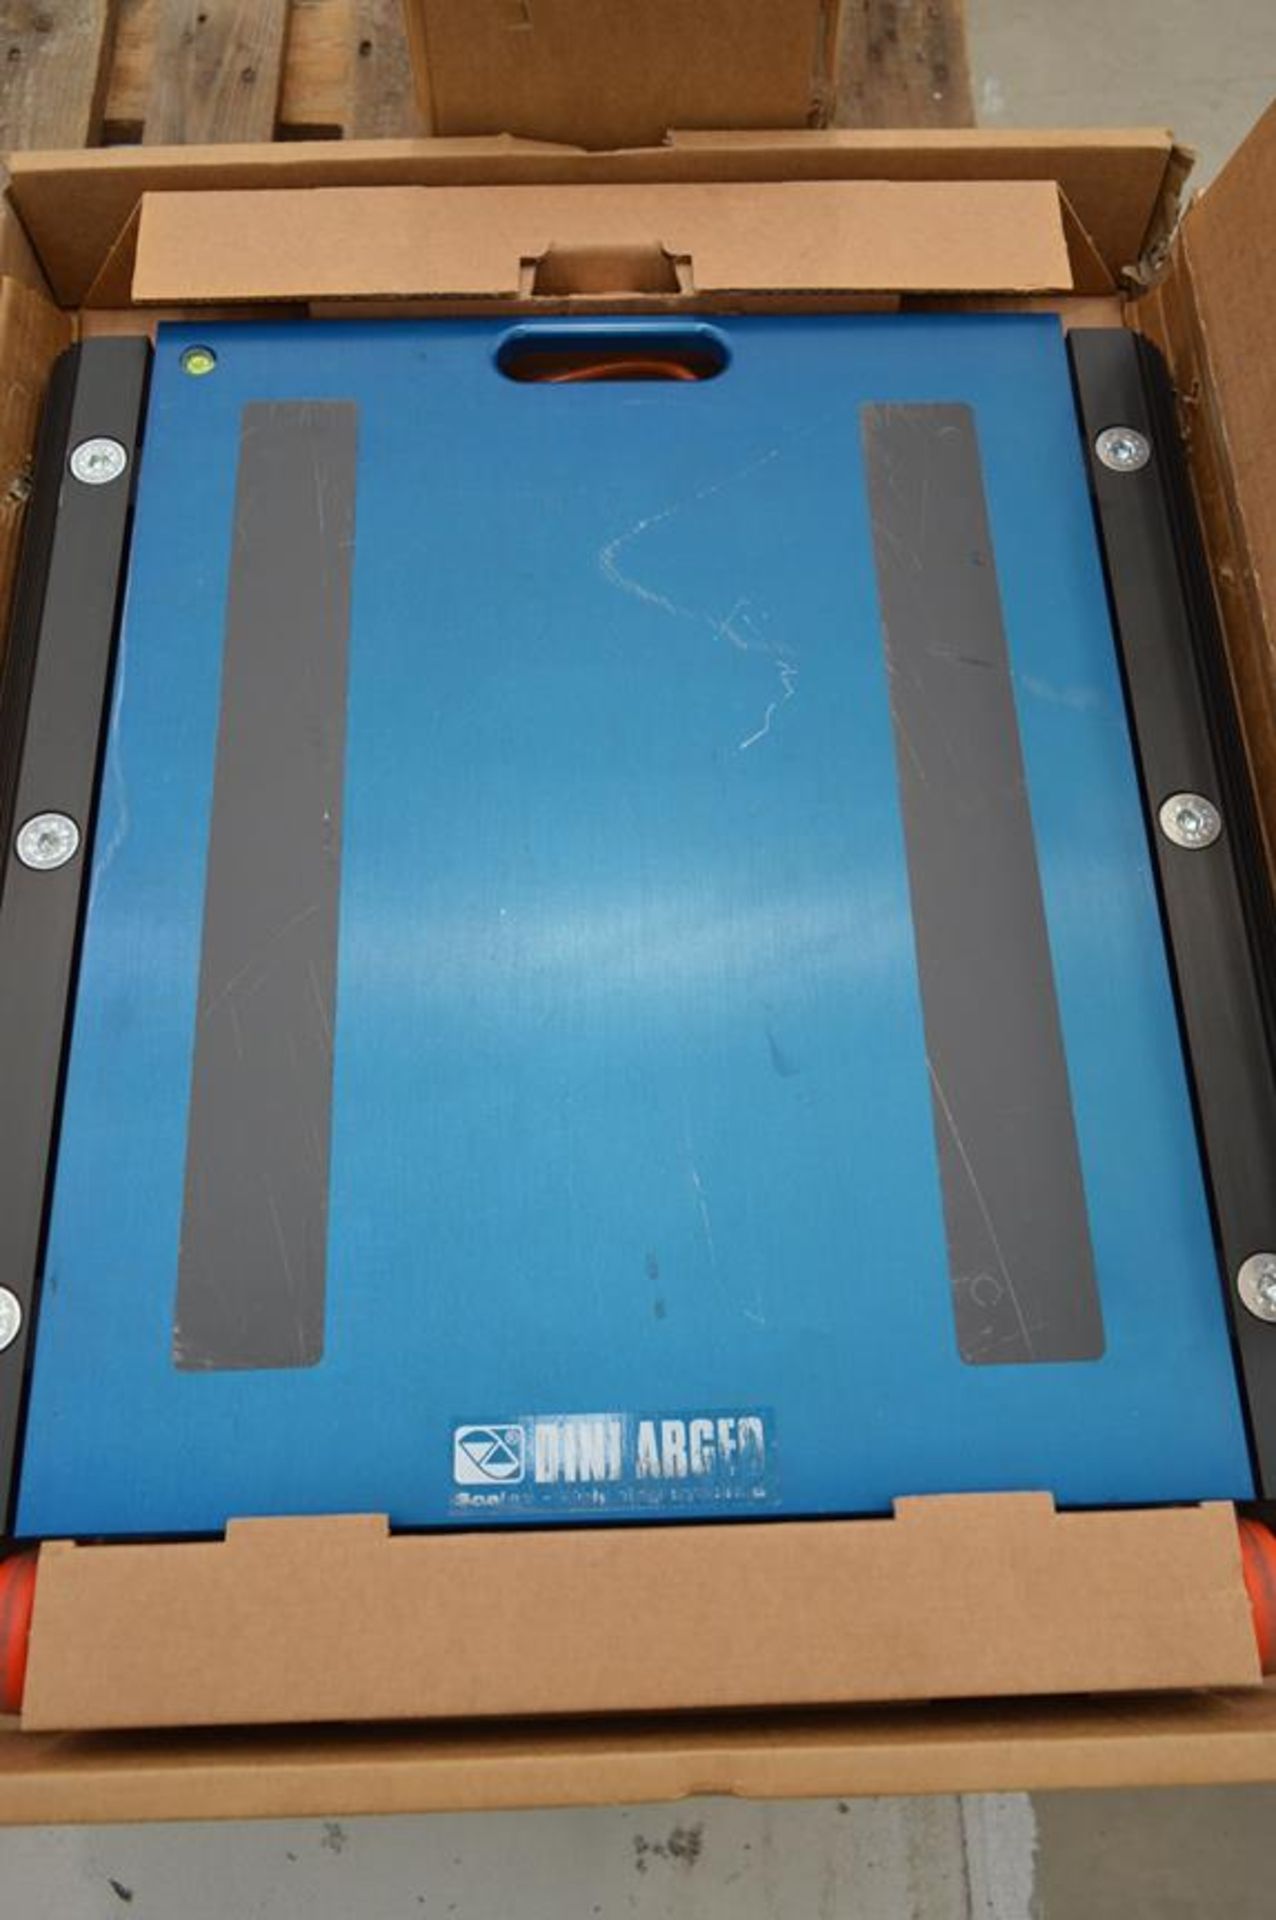 Dini Argeo vehicle weighing scales with 4 pads and control - Image 2 of 6